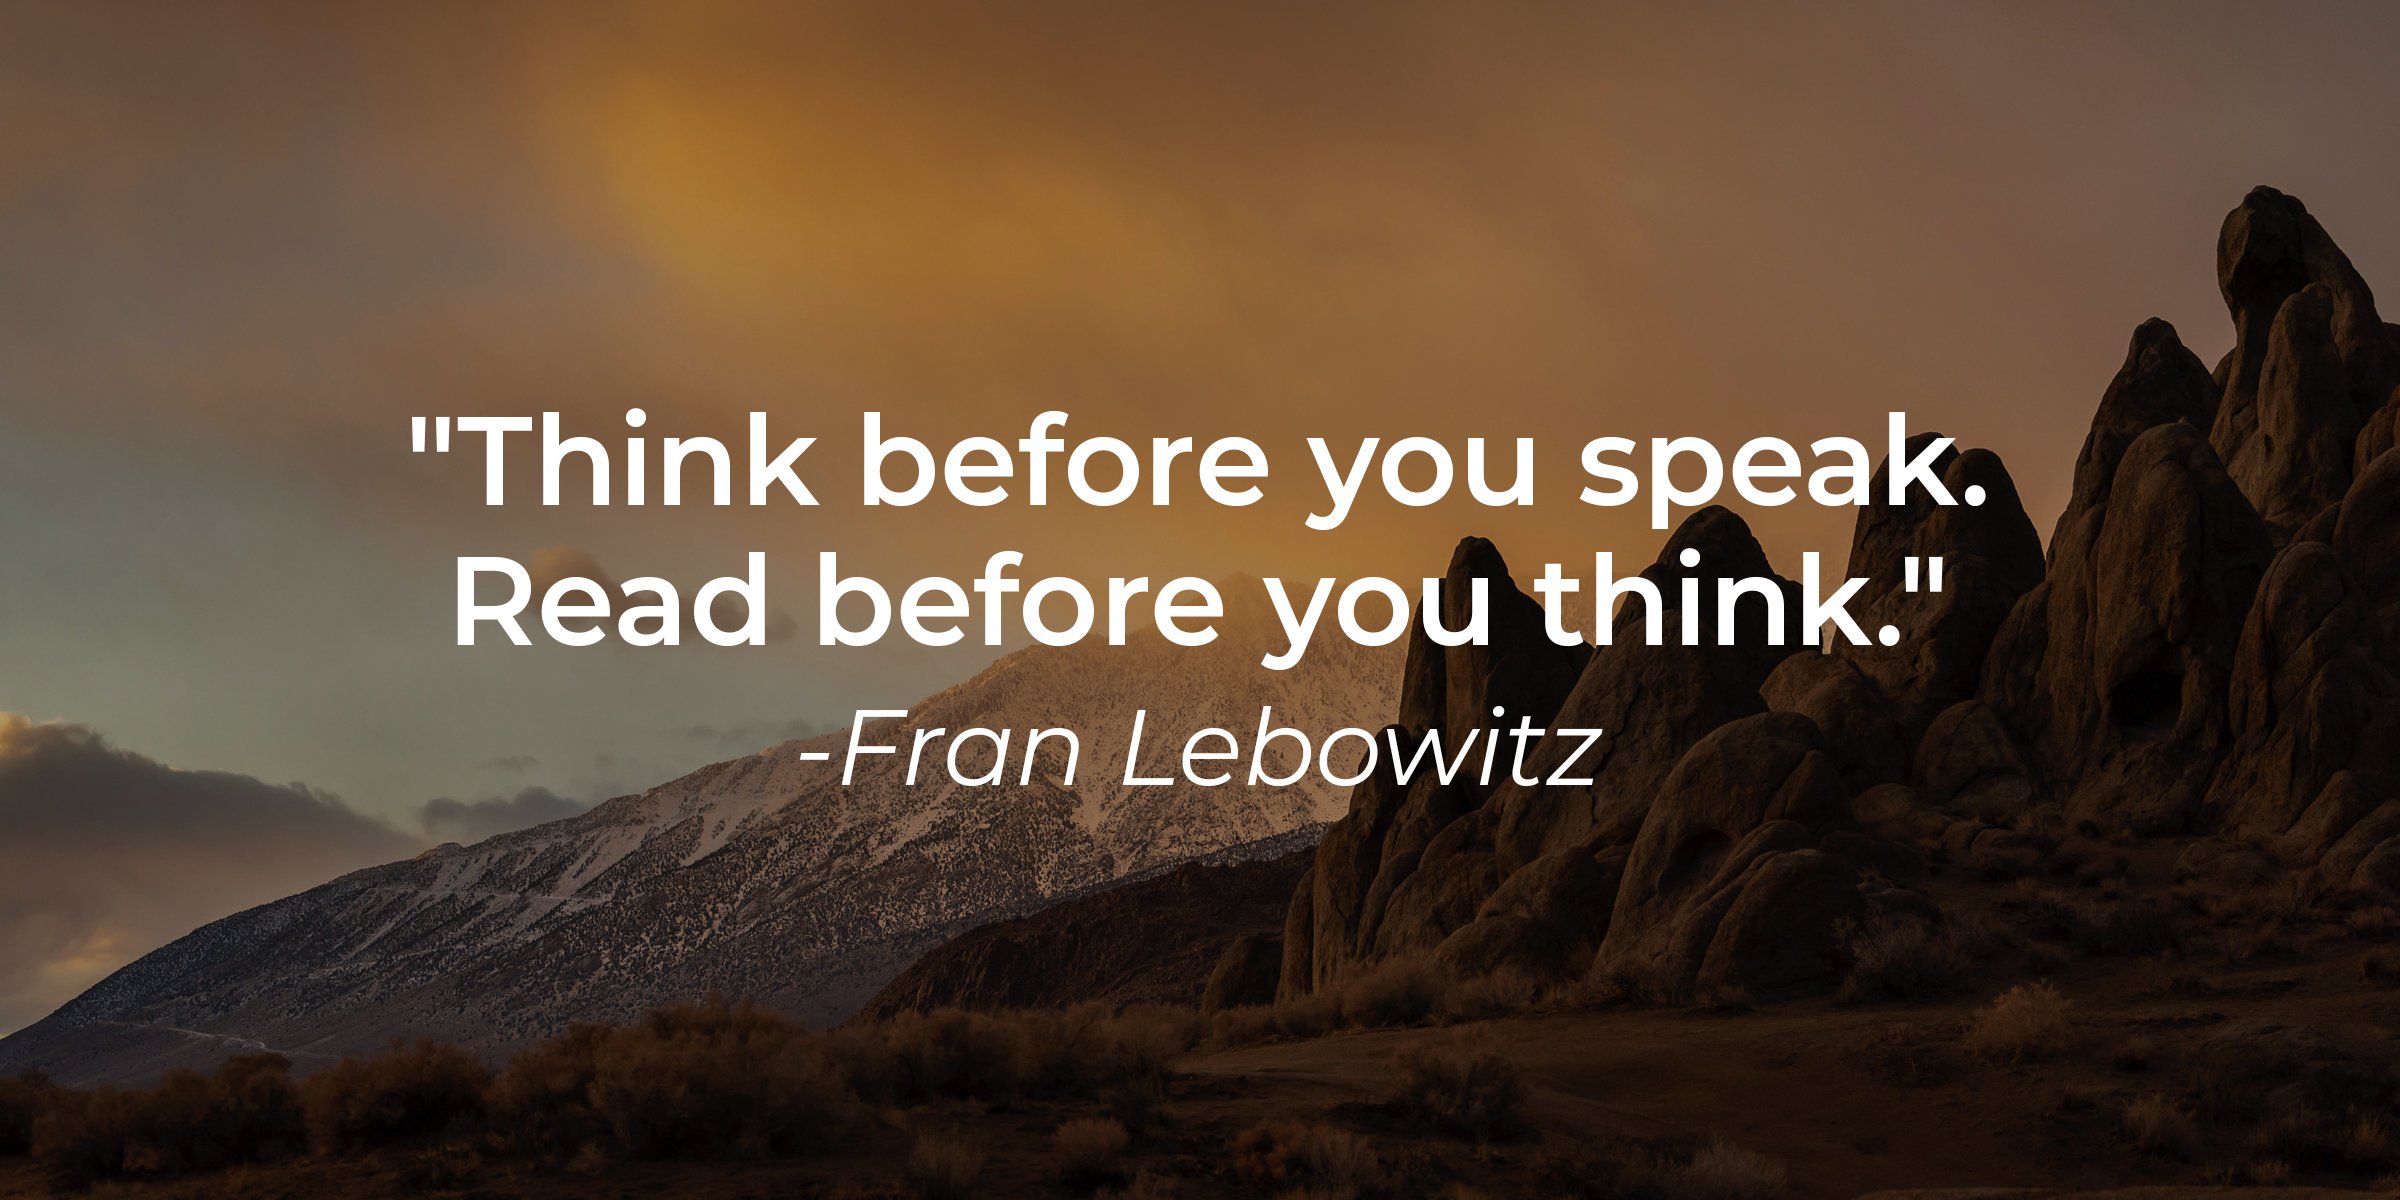 Unsplash | Fran Lebowitz's quote: "Think before you speak. Read before you think." | Image: AmoDays